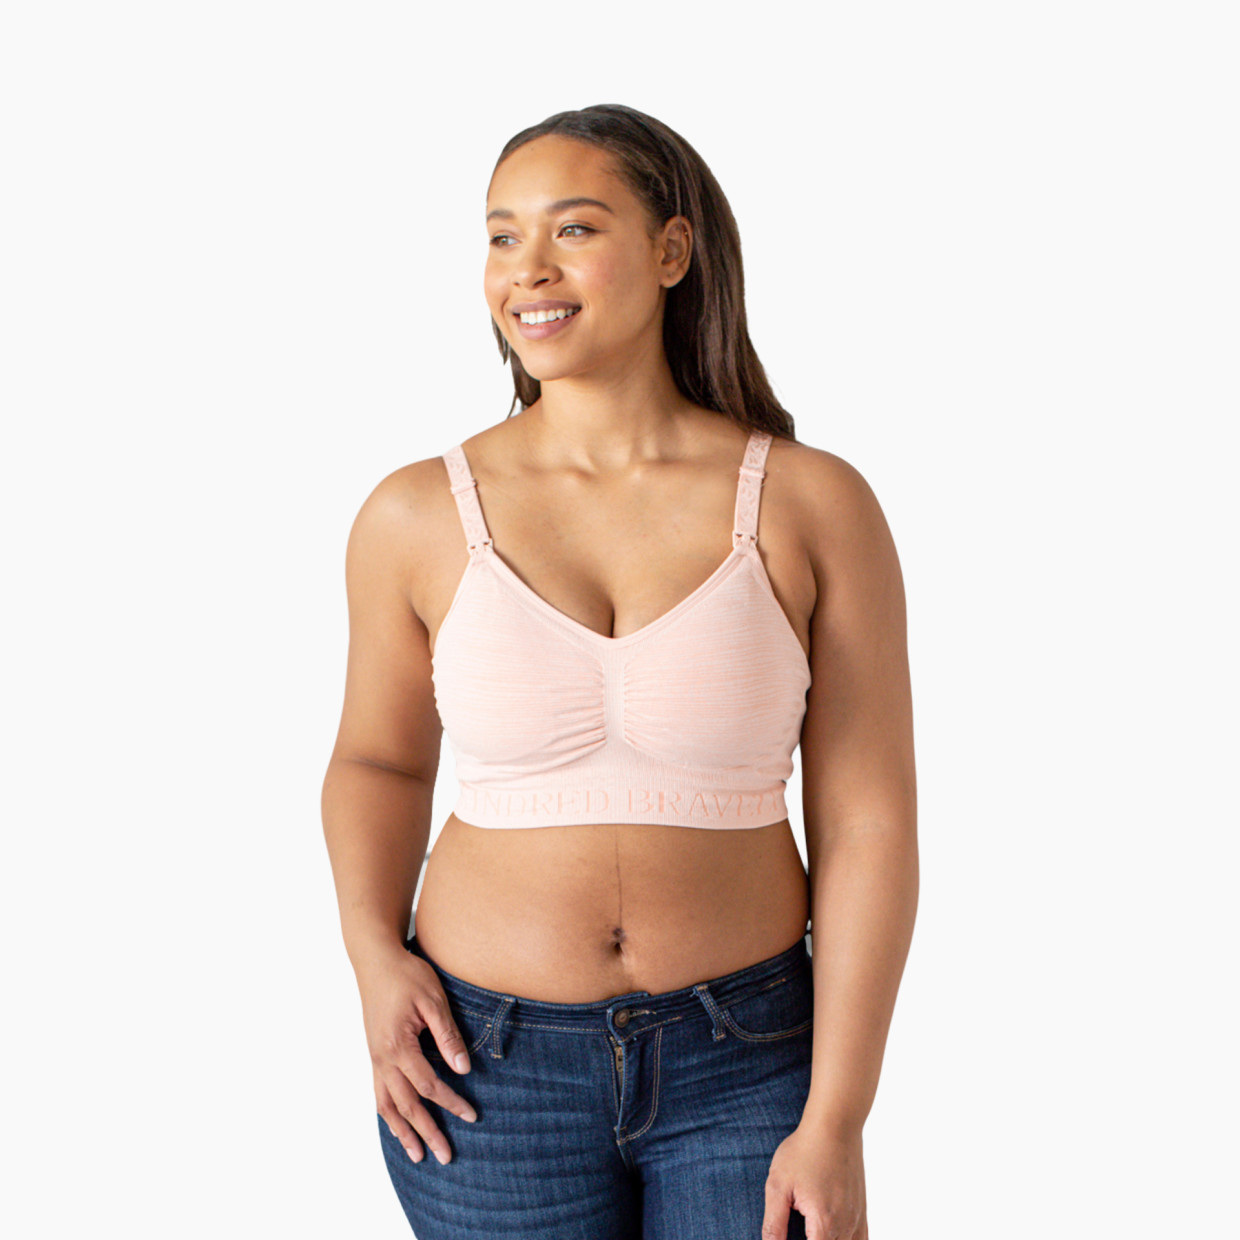 Kindred Bravely Sublime Hands Free Pumping Bra - Pink Heather, Medium-Busty